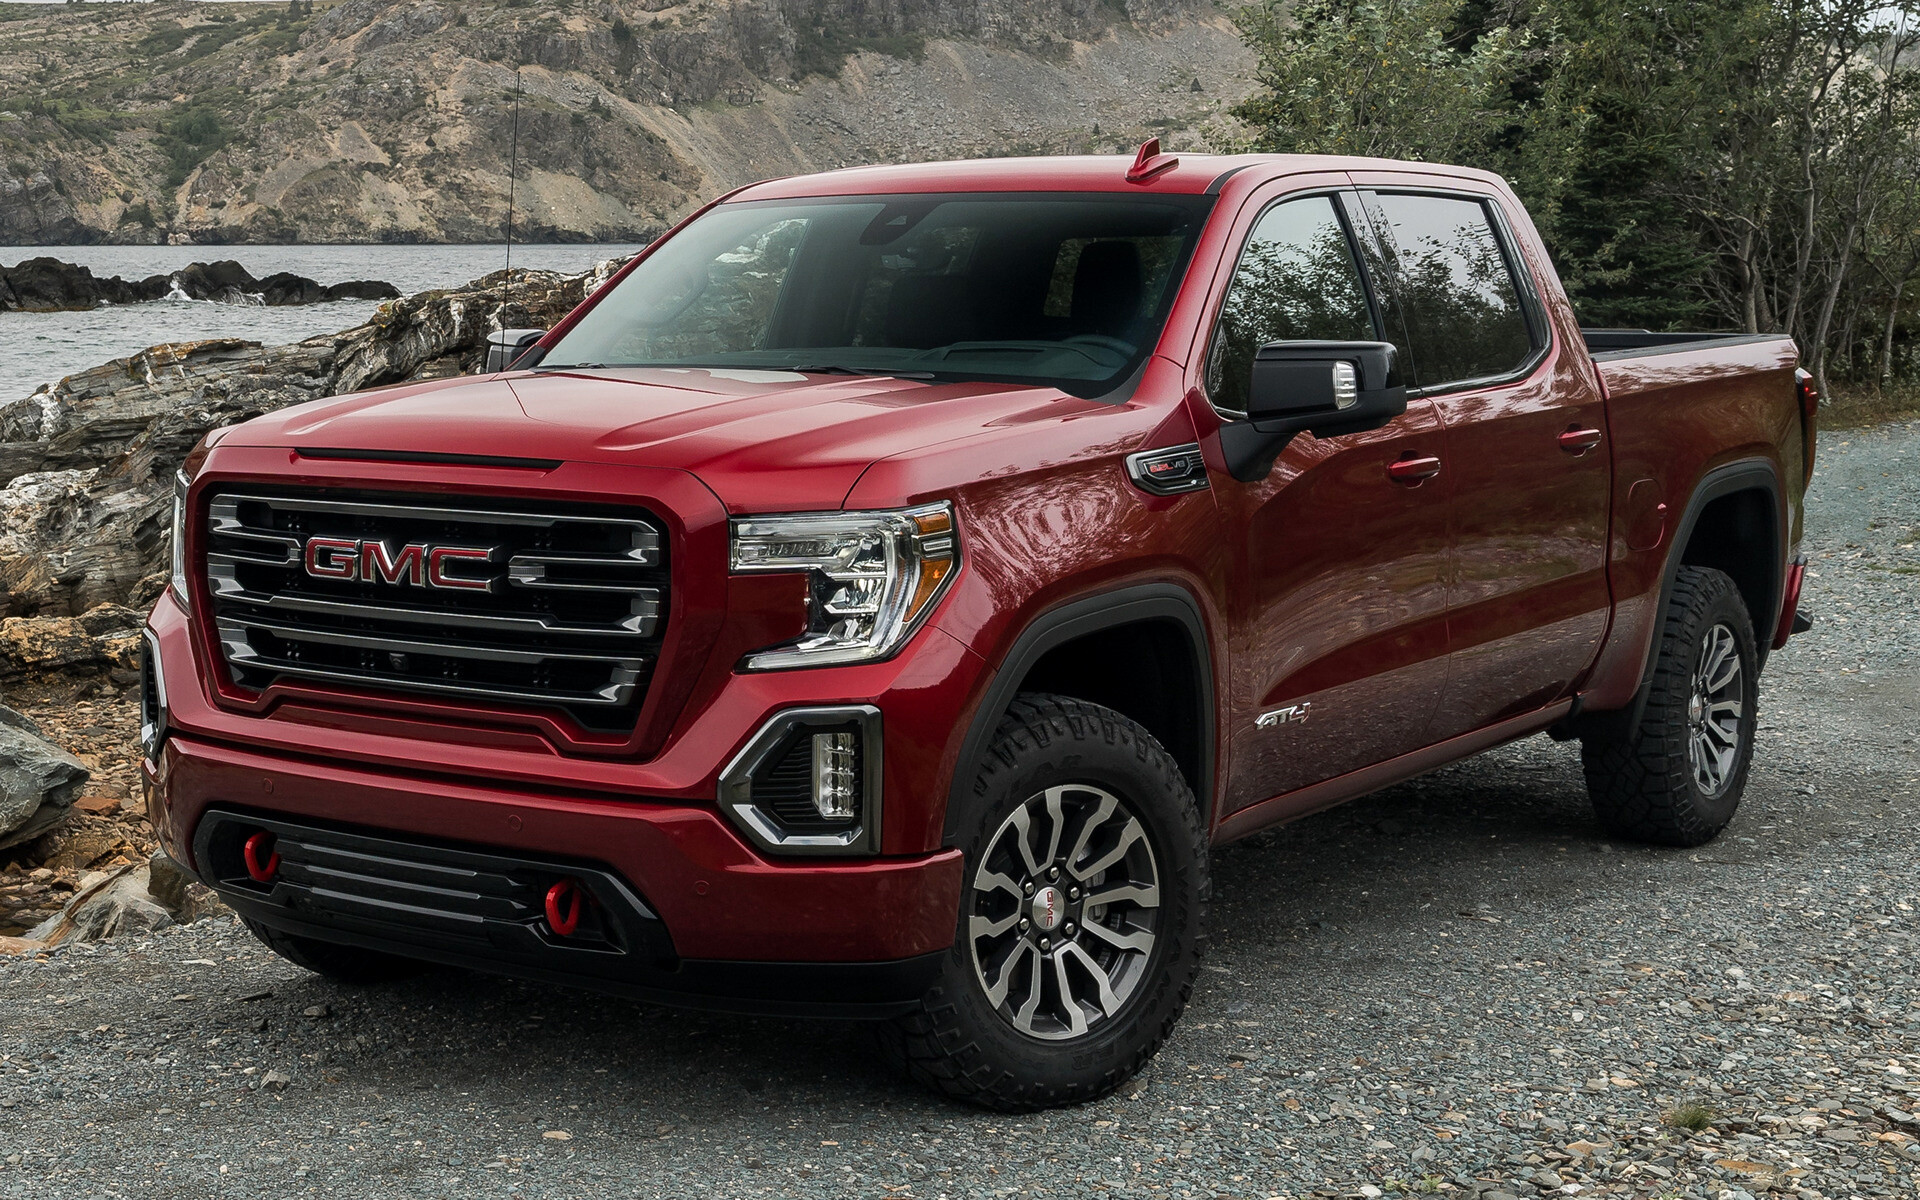 GMC Sierra: AT4 Crew Cab, Authentic off-road capability, 2-inch factory-installed suspension lift. 1920x1200 HD Background.